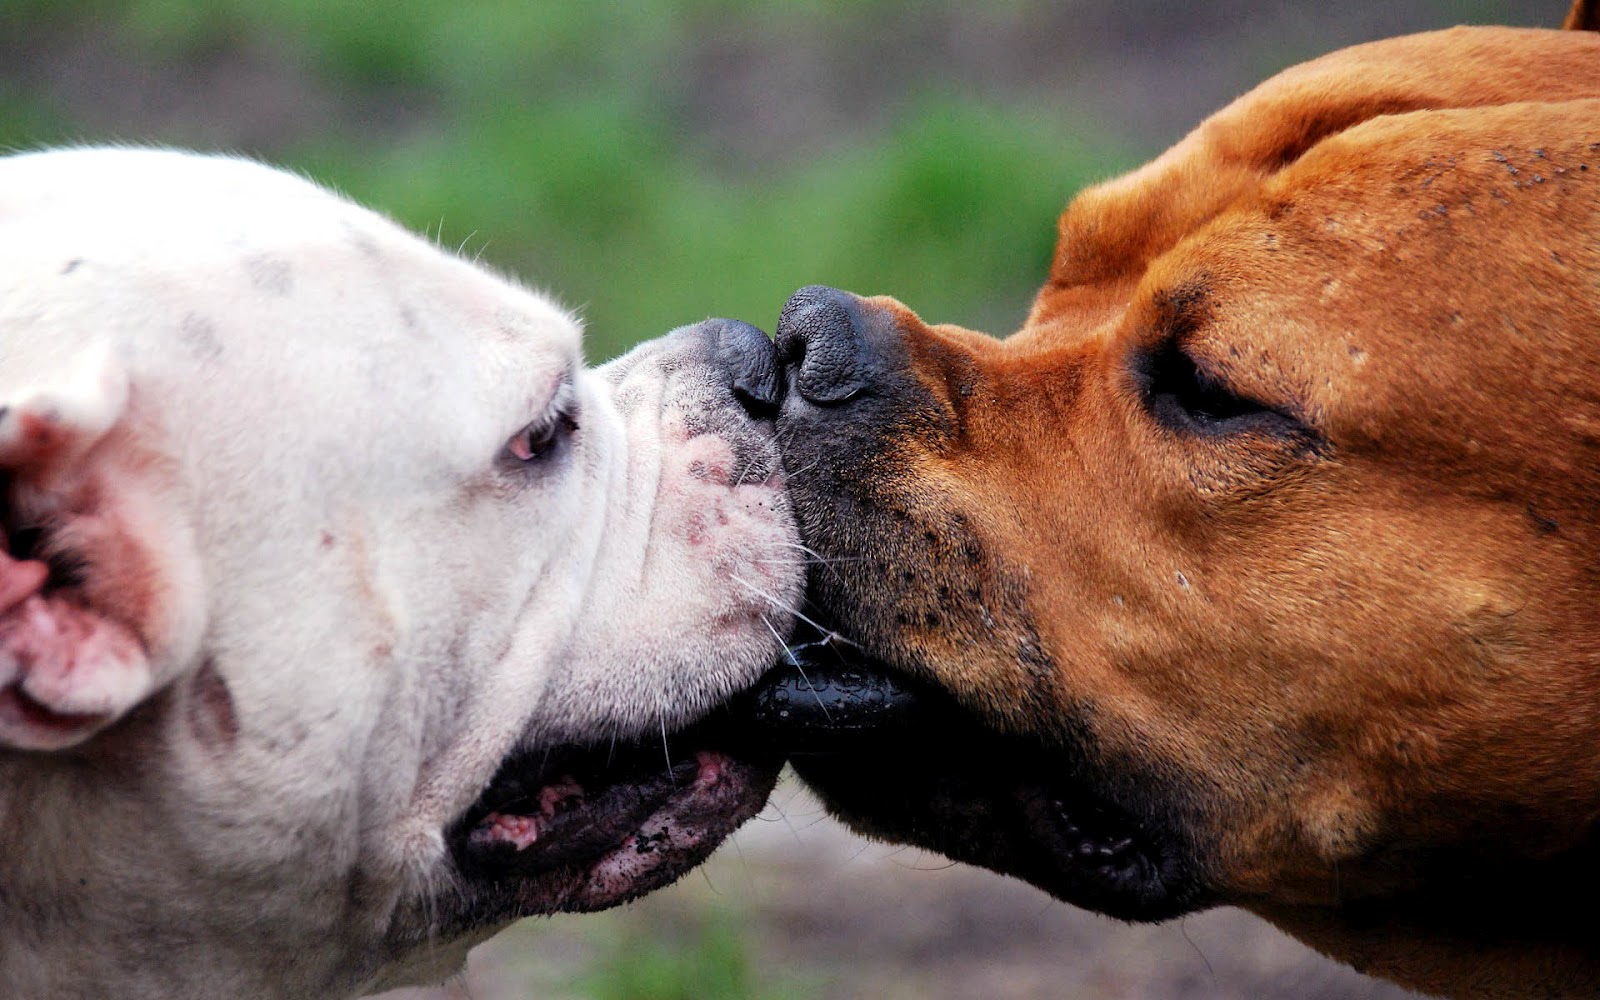 HD Dog Wallpaper With Two Dogs Kissing Jpg